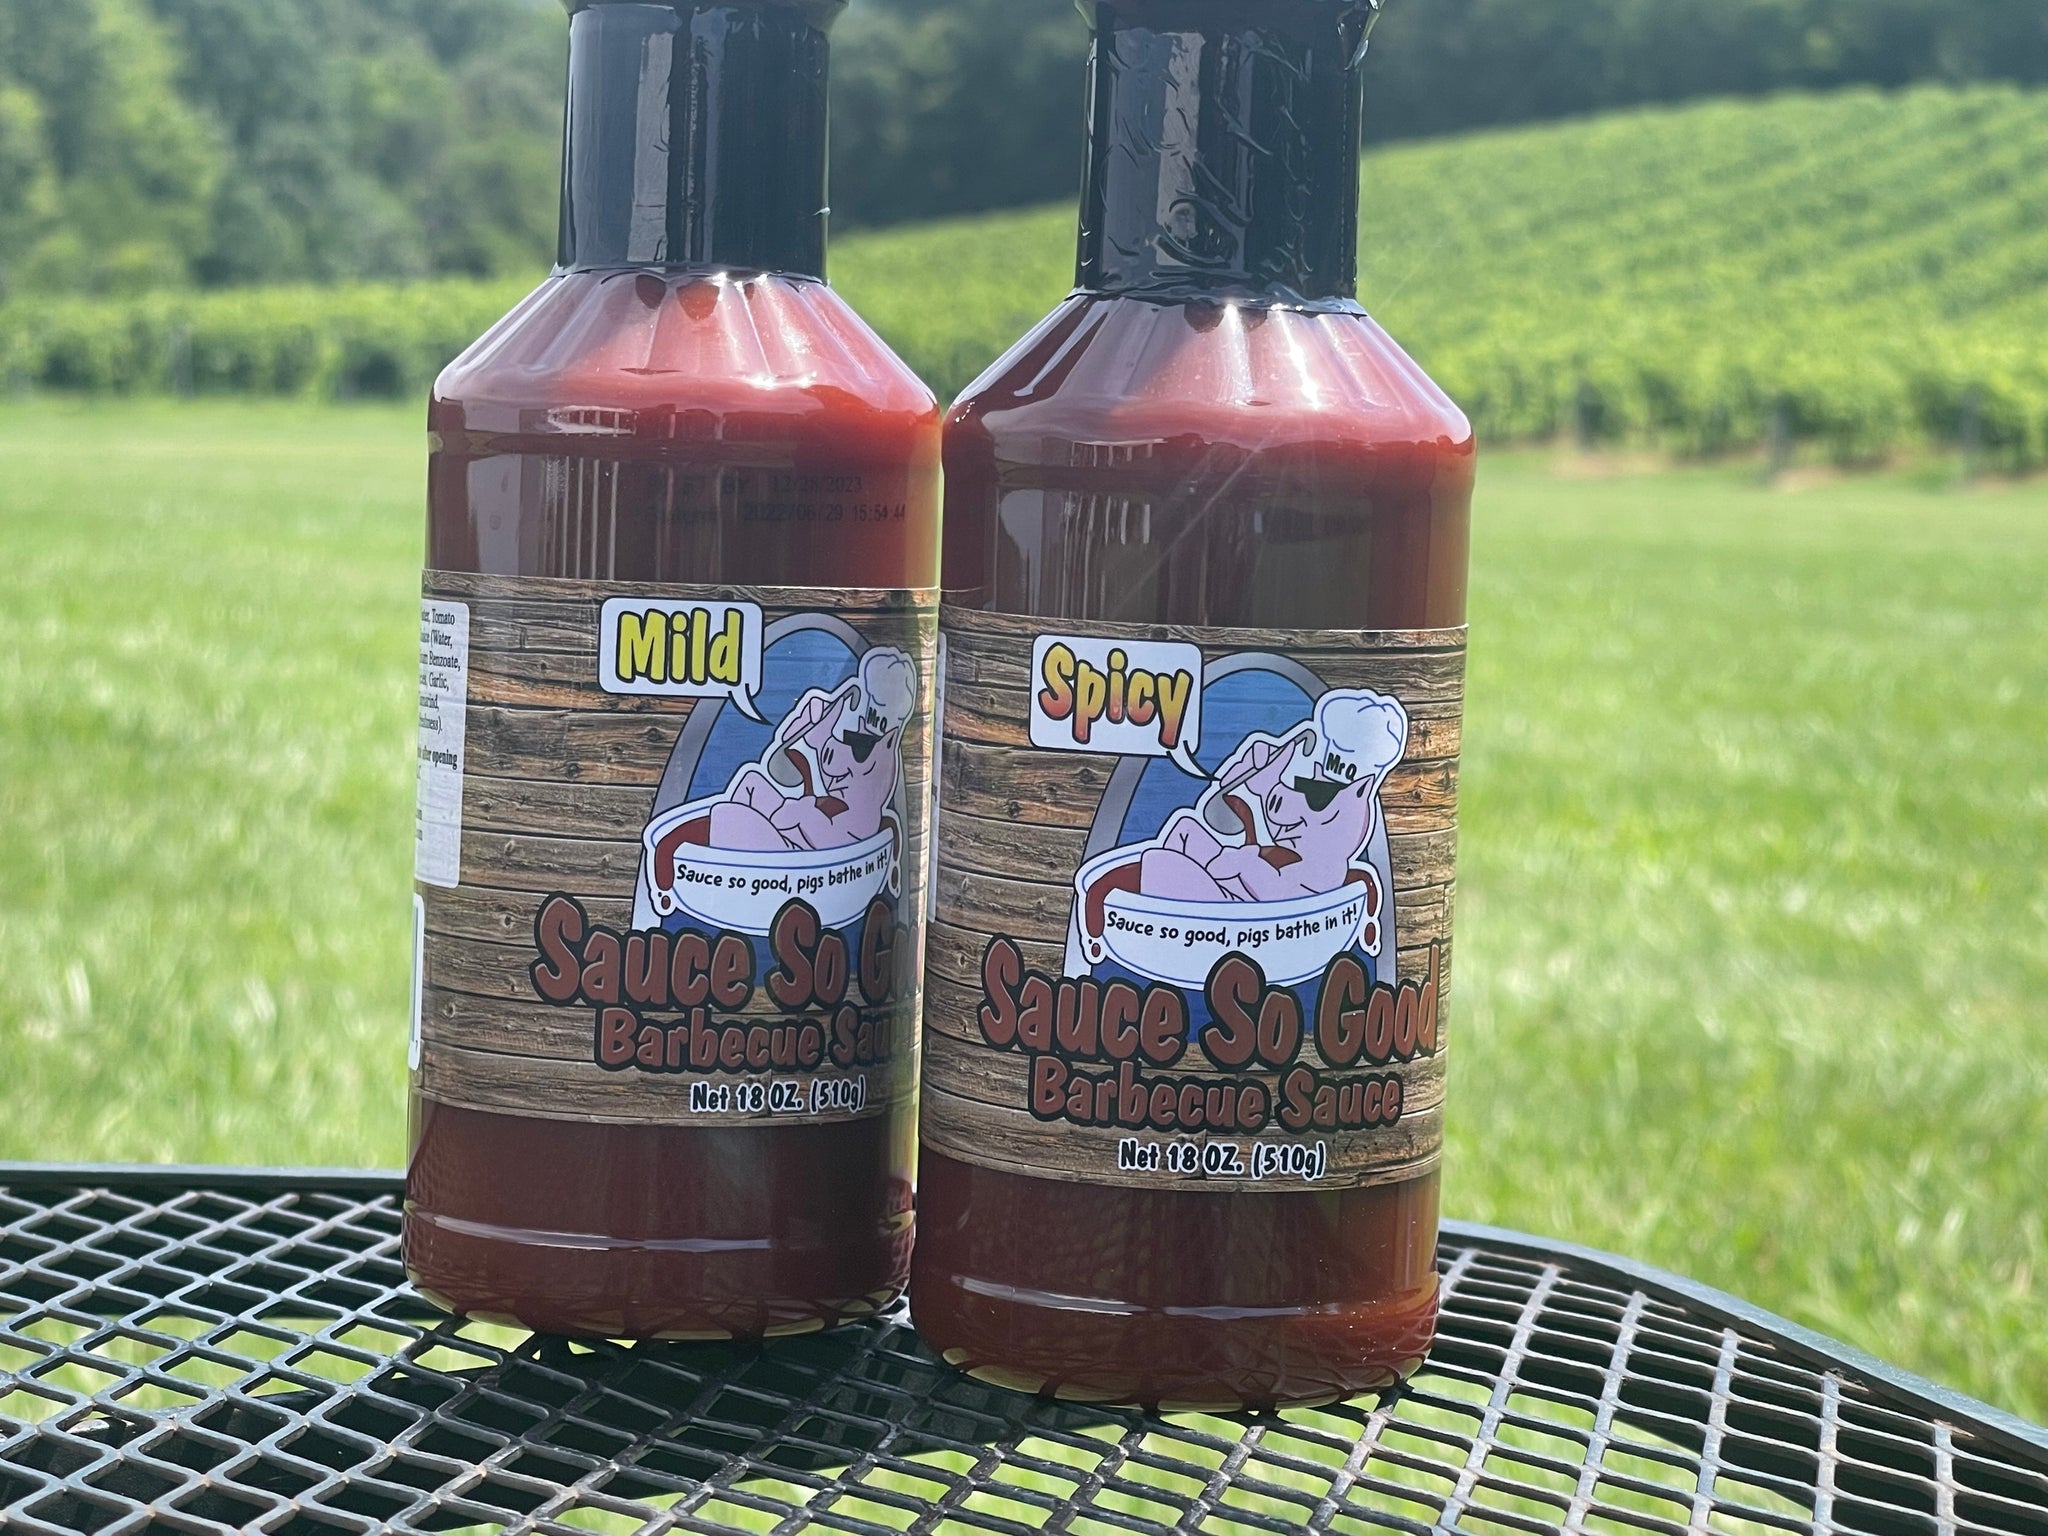 The Best-Tasting Barbecue Sauce on the Planet – Sauce So Good